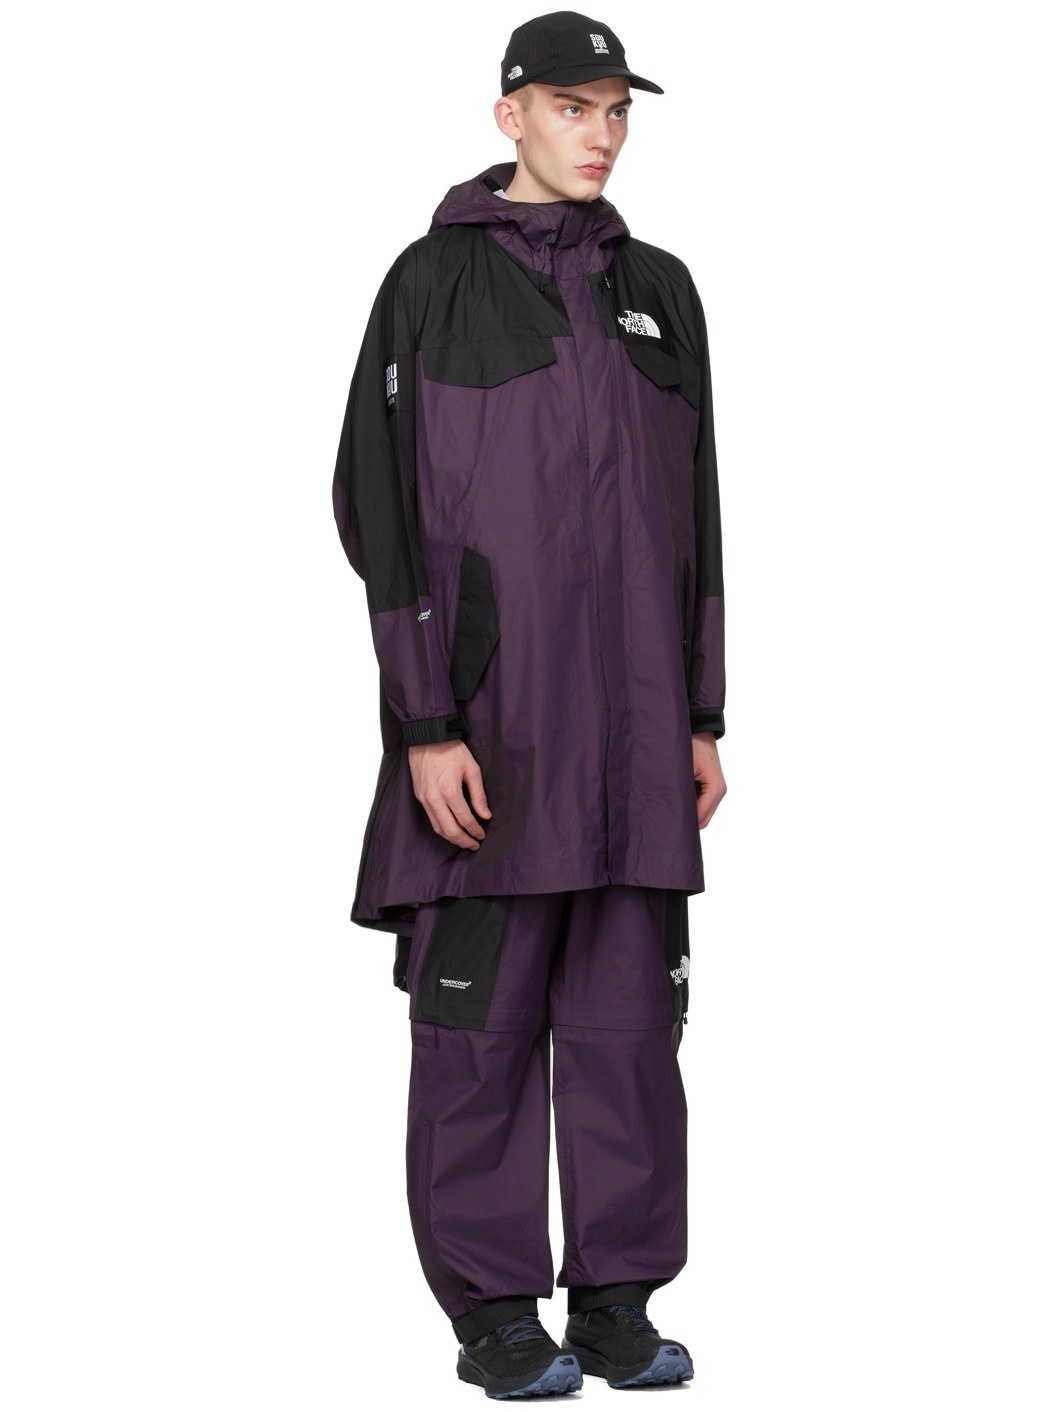 Purple & Black The North Face Edition Hike Jacket - 2